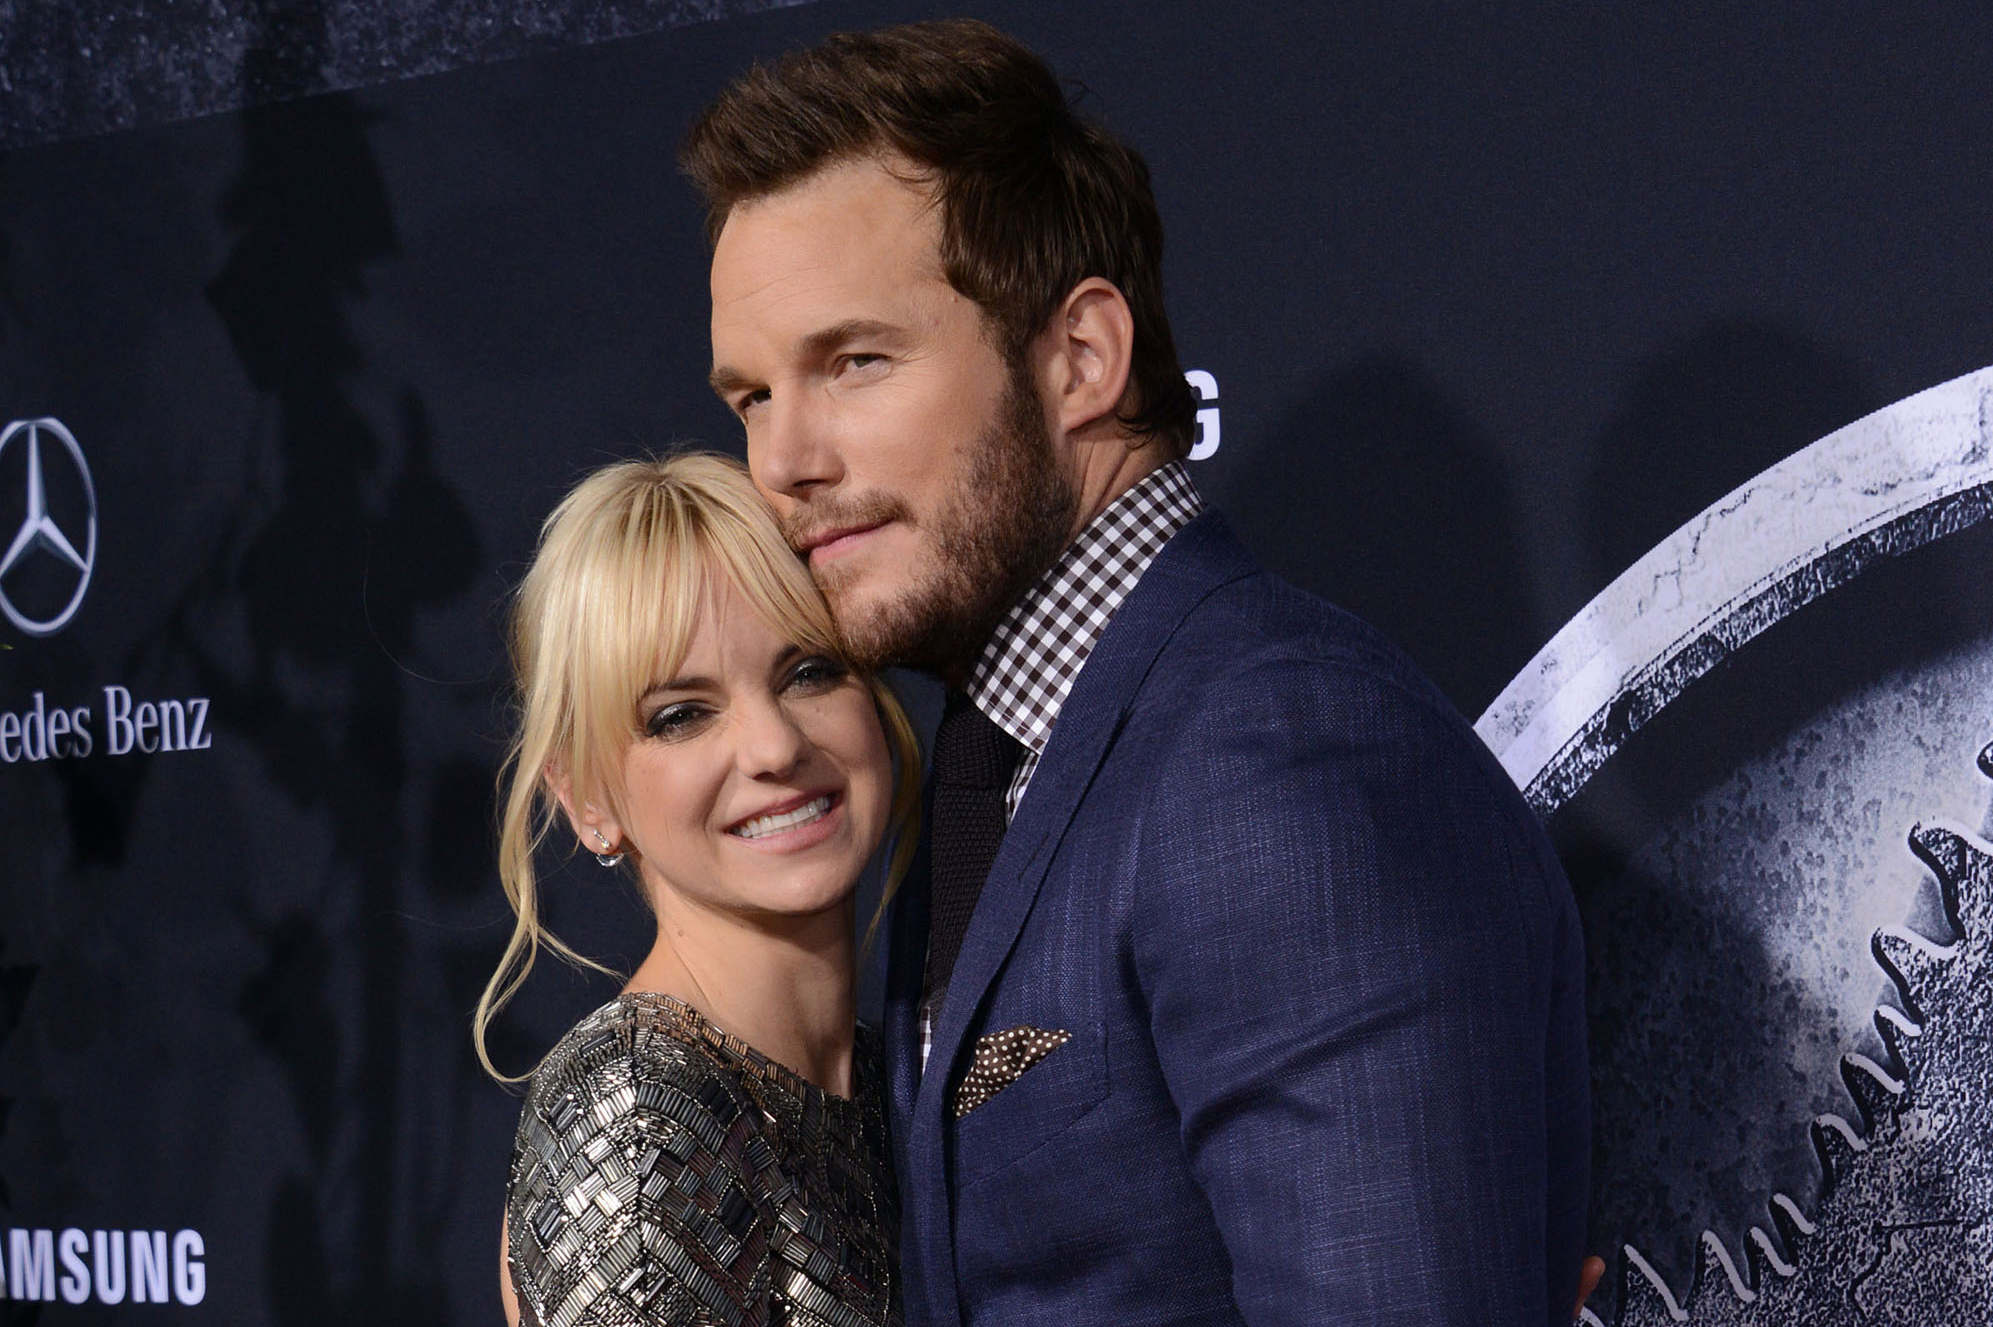 51769213 Celebrities at the Los Angeles premiere of 'Jurassic World' at the Dolby Theater in Hollywood, California on June 9, 2015. Celebrities at the Los Angeles premiere of 'Jurassic World' at the Dolby Theater in Hollywood, California on June 9, 2015.

Pictured: Chris Pratt, Anna Faris FameFlynet, Inc - Beverly Hills, CA, USA - +1 (310) 505-9876 RESTRICTIONS APPLY: NO FRANCE